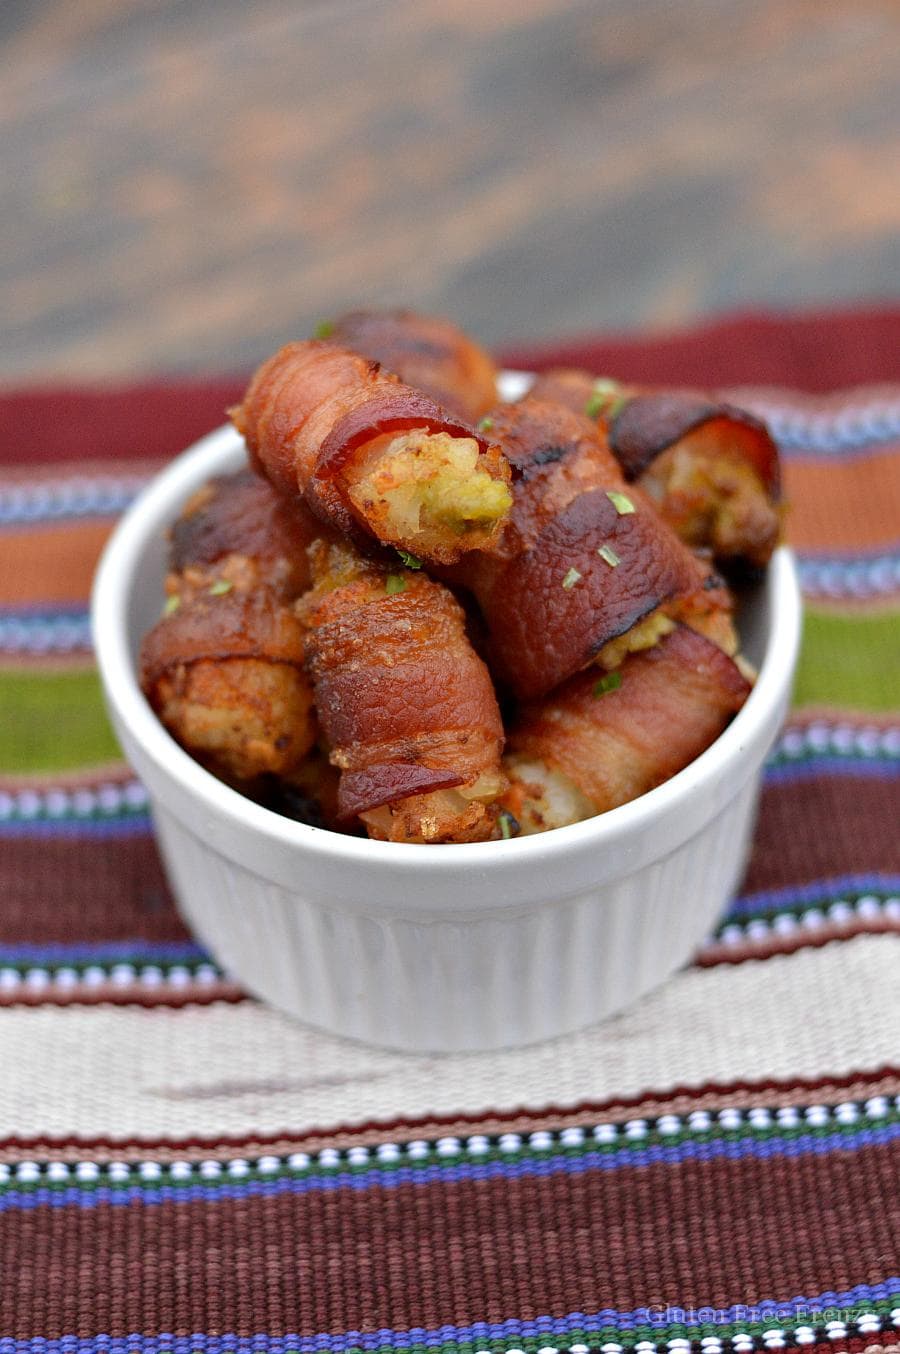 Bacon wrapped tater tots
